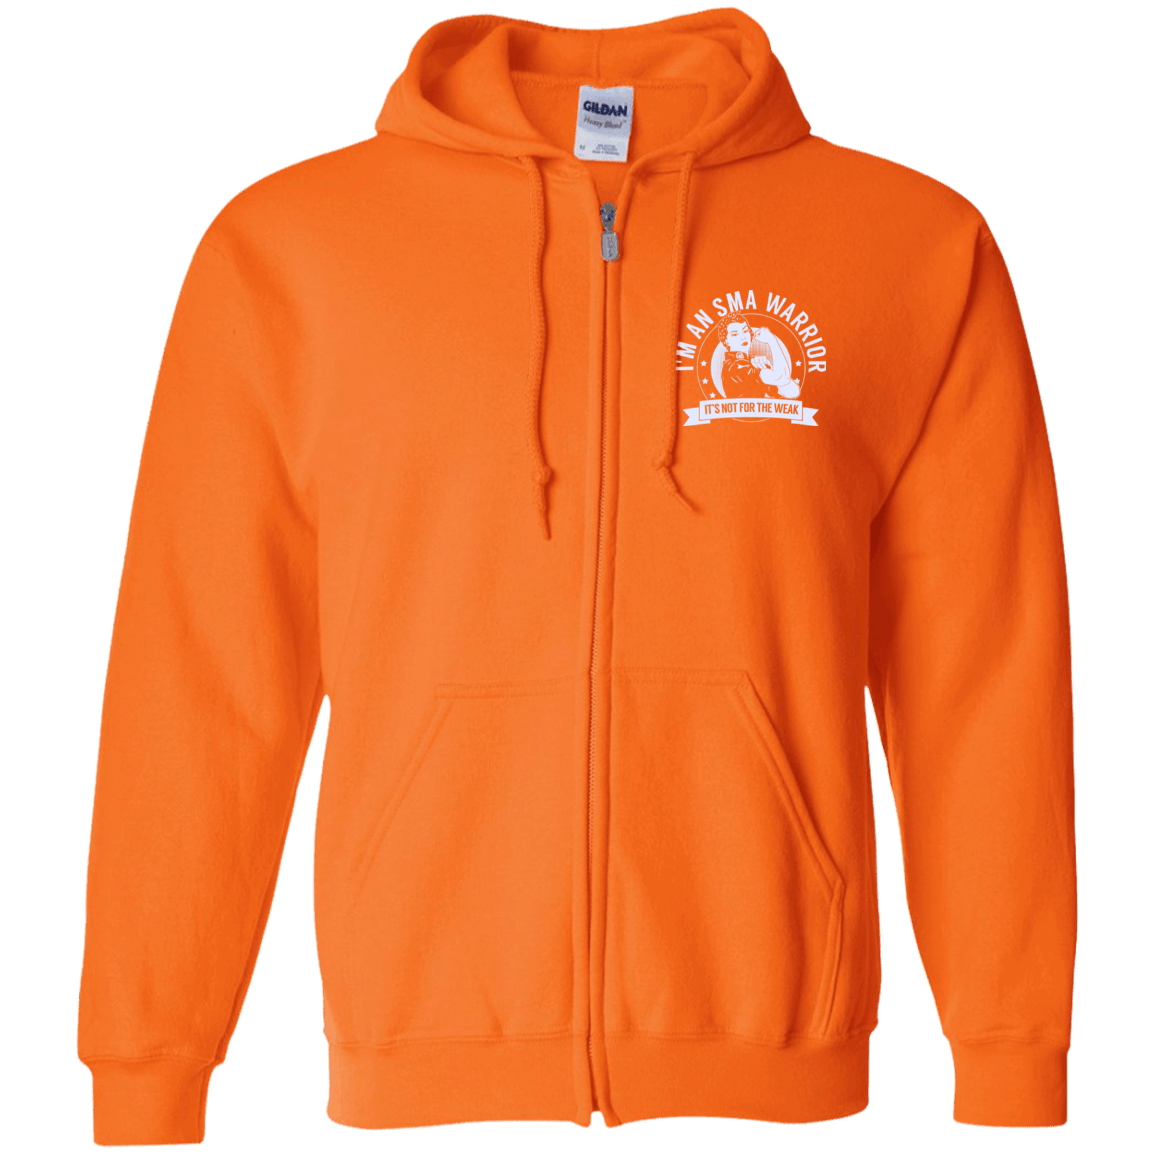 Spinal Muscular Atrophy - SMA Warrior NFTW Zip Up Hooded Sweatshirt - The Unchargeables